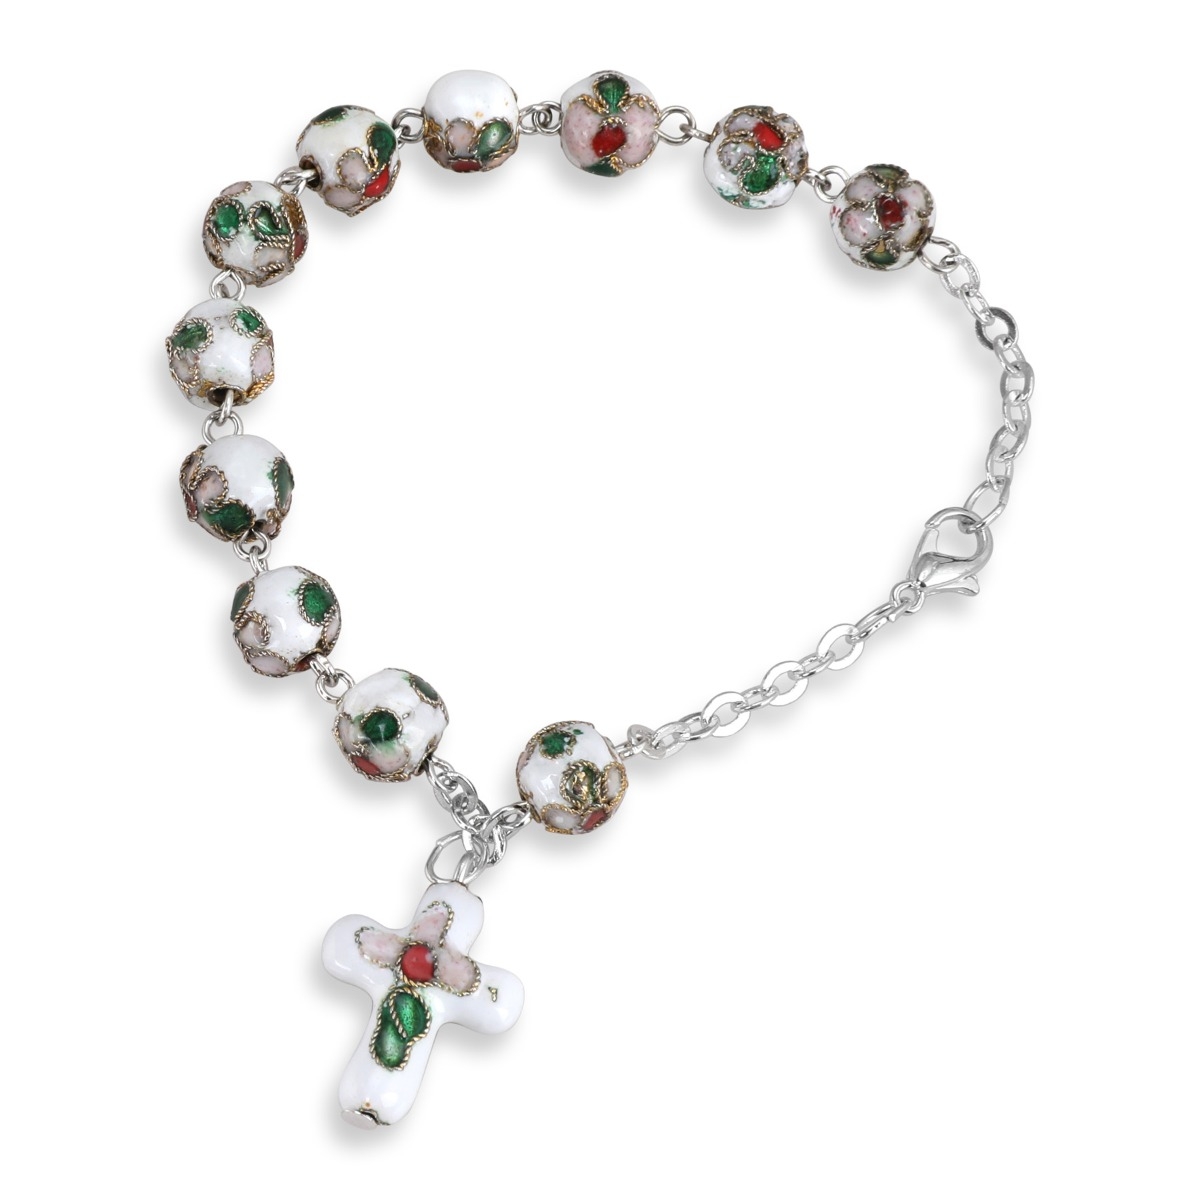 Holyland Rosary Small Rosary Bracelet With Cloisonné Beads and Latin Cross - 1